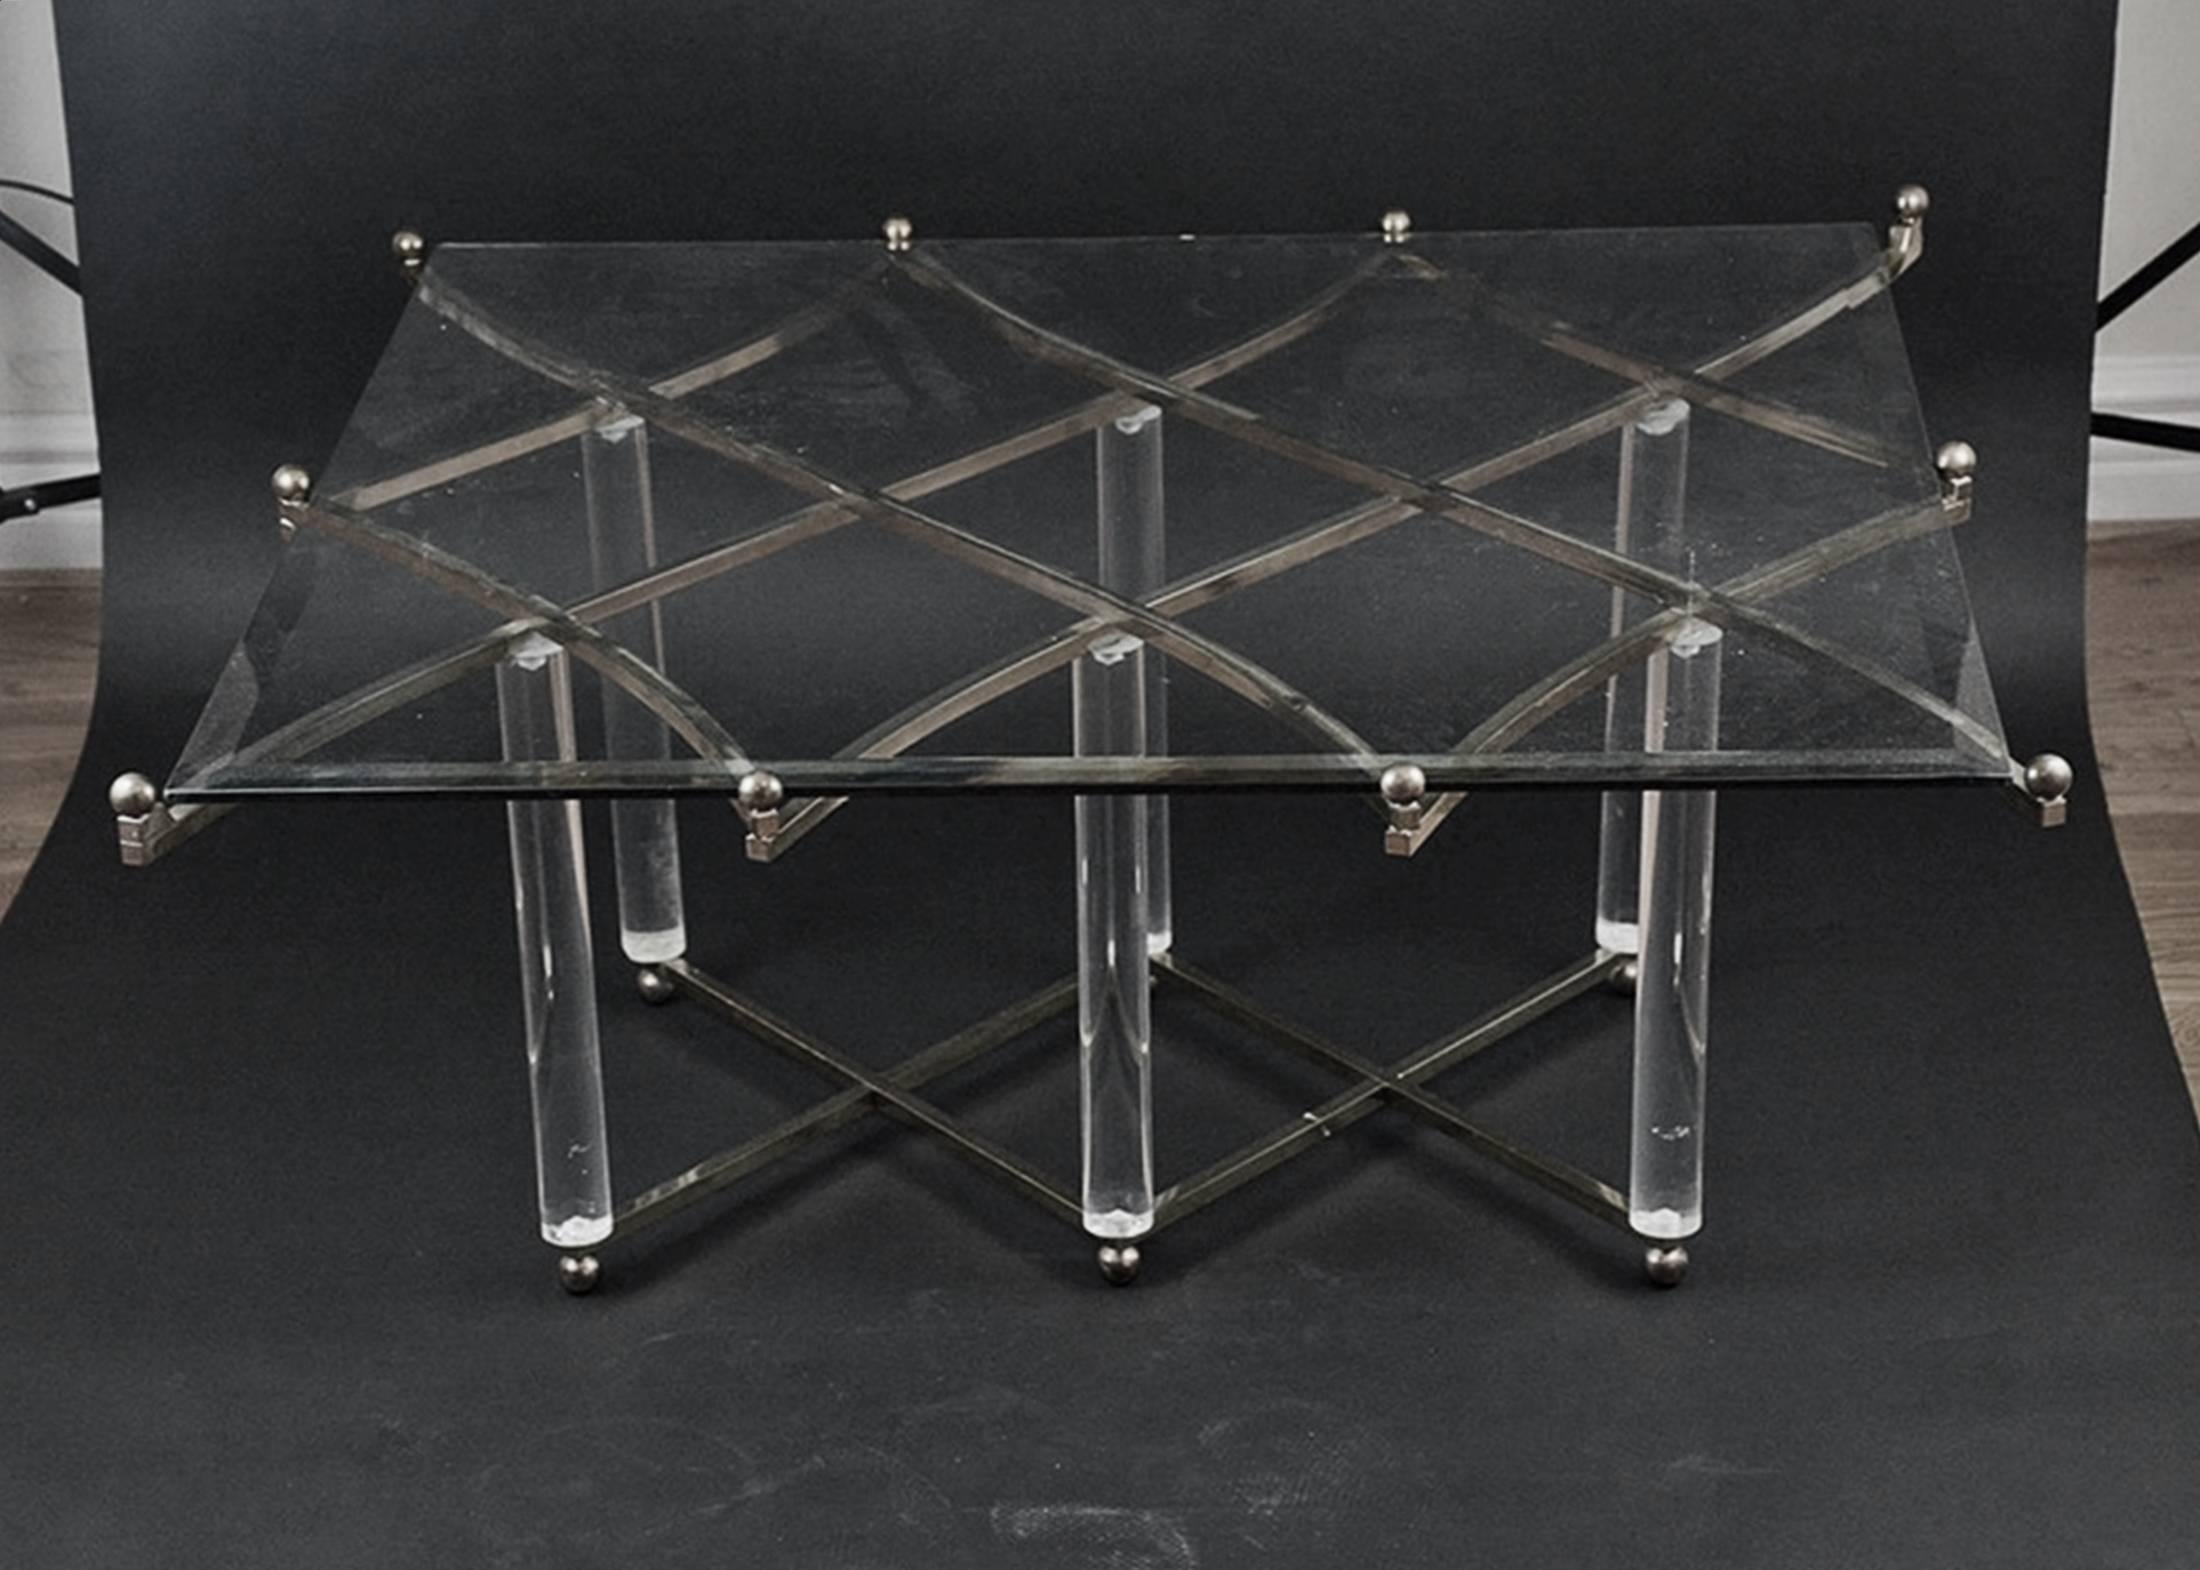 This amazing polished nickel and Lucite coffee table by Hollis Jones is quite possibly his most exquisite design. 
Known for his innovation with the use of Lucite and metal, Hollis Jone is a master at combining elegance and wit. The lattice work of